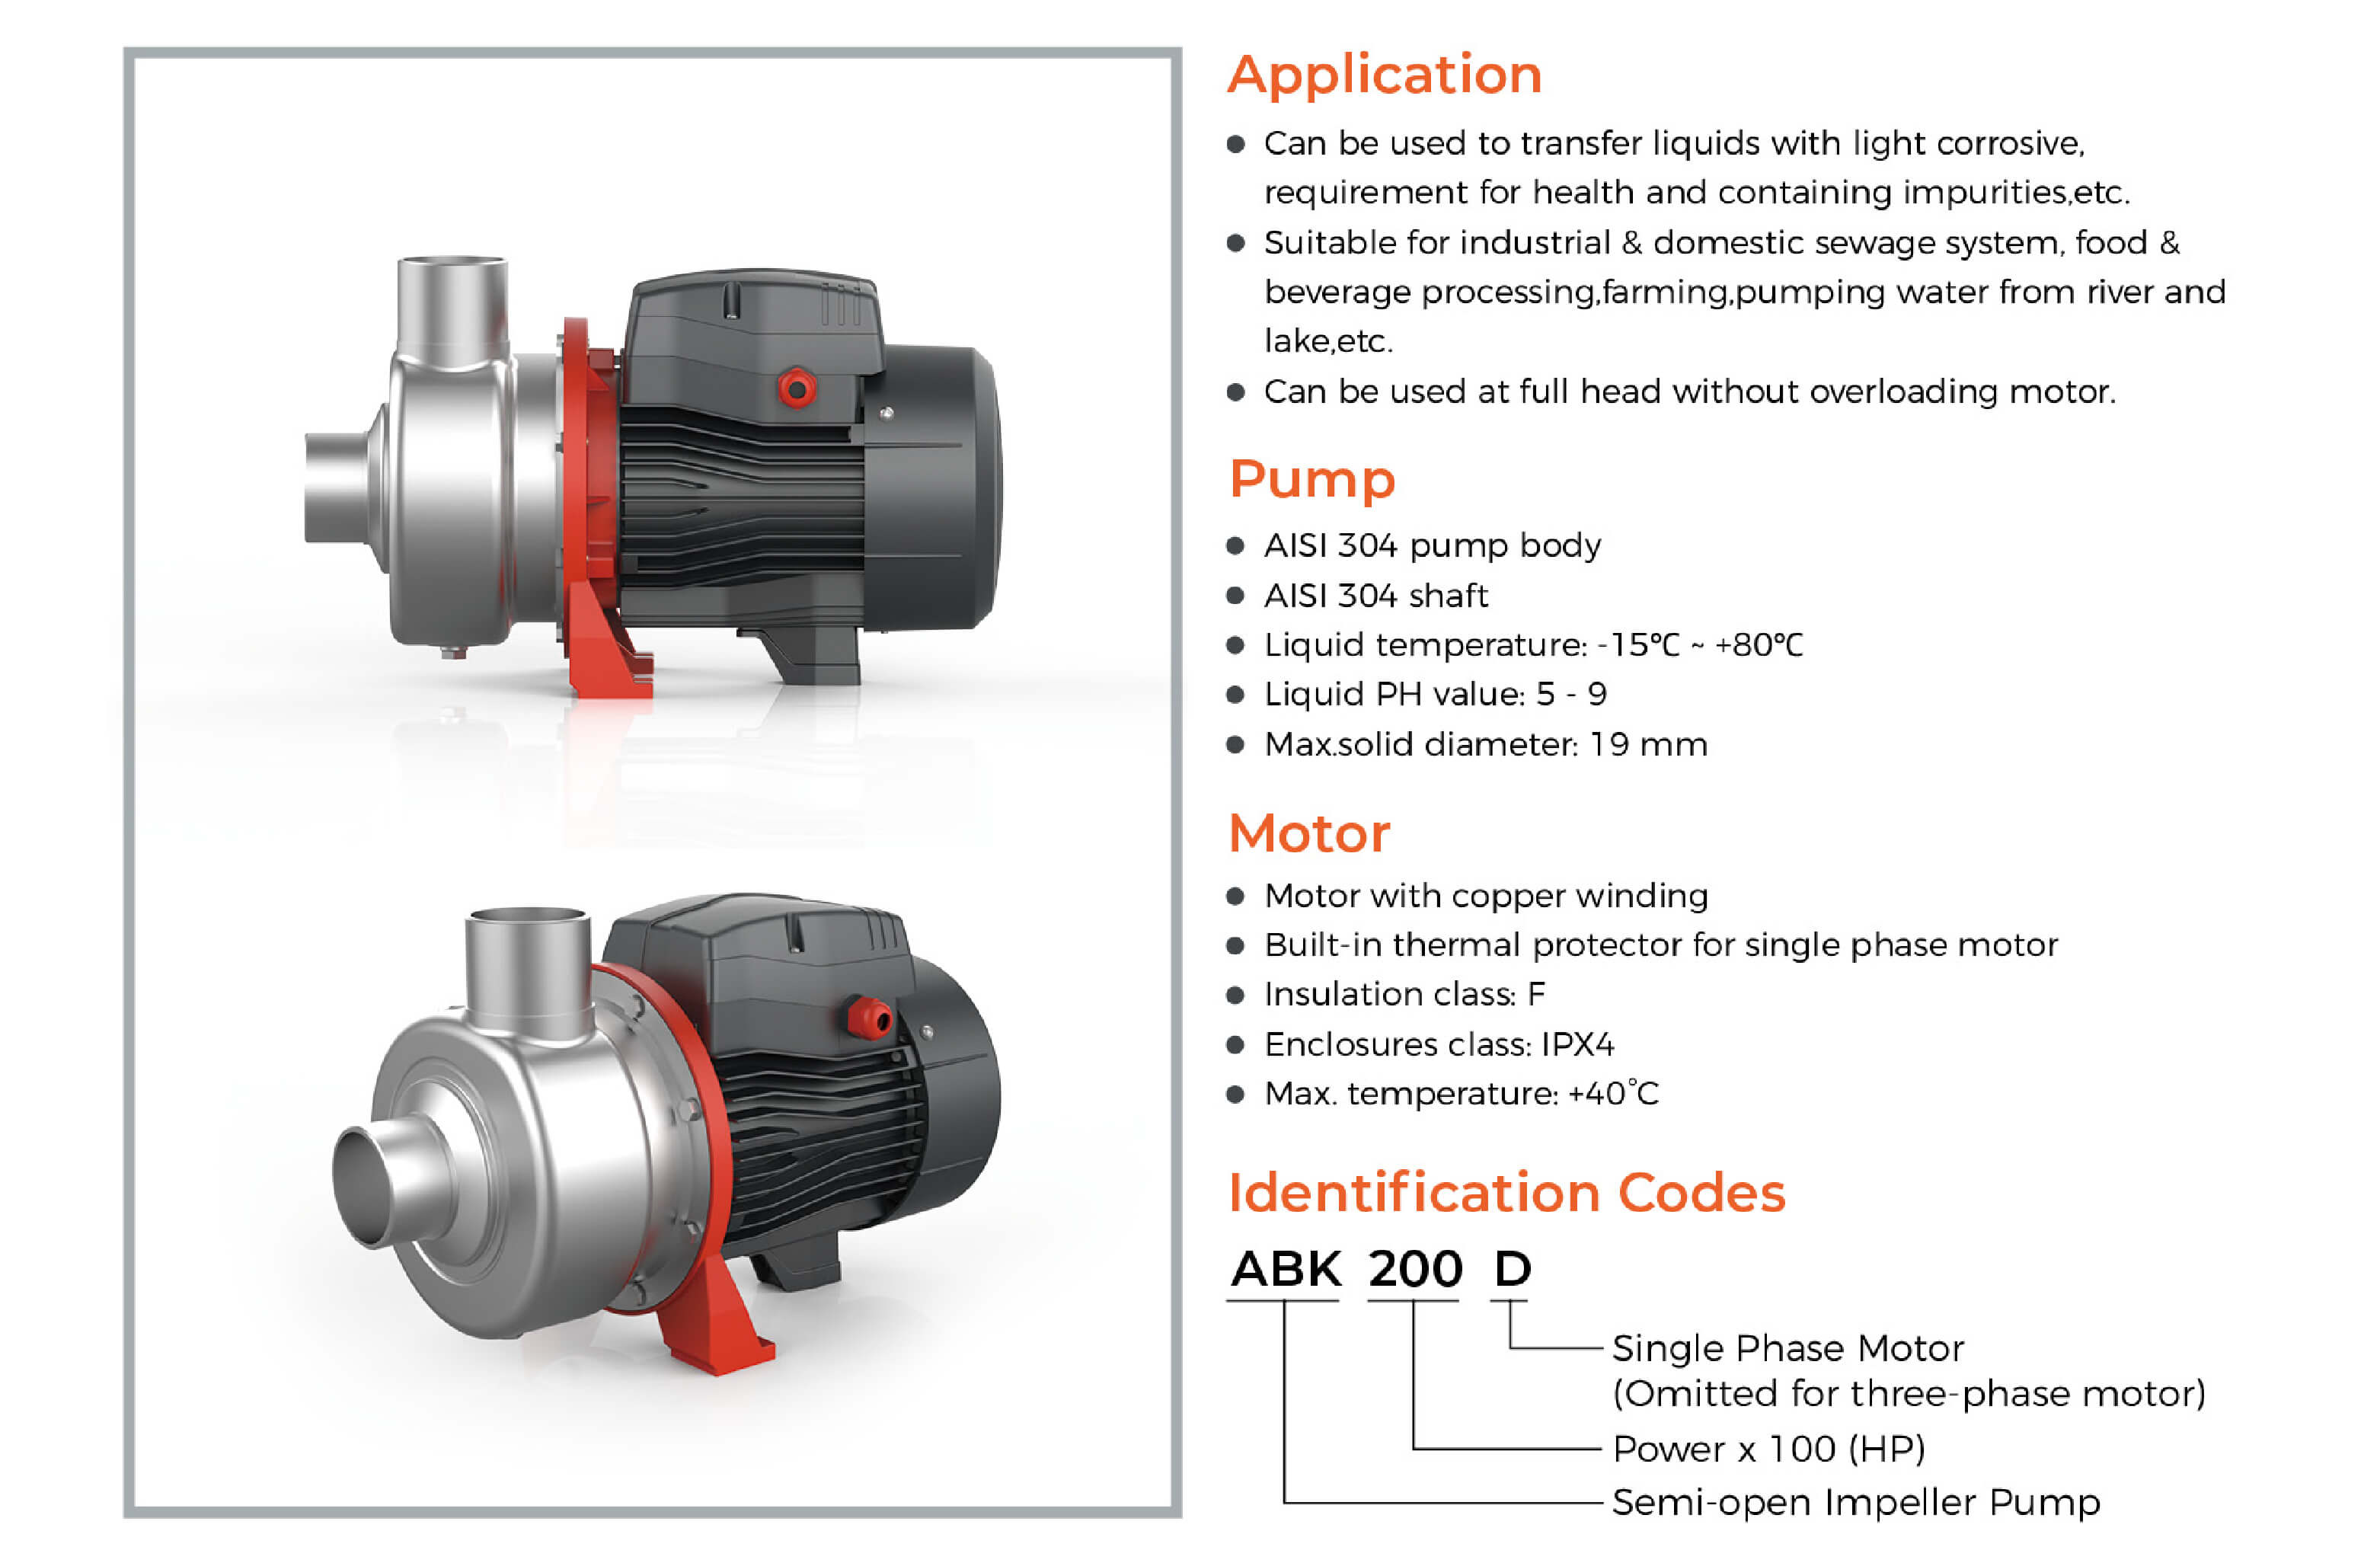 ABK Semi-open Impeller Stainless Steel Centrifugal Pump Features